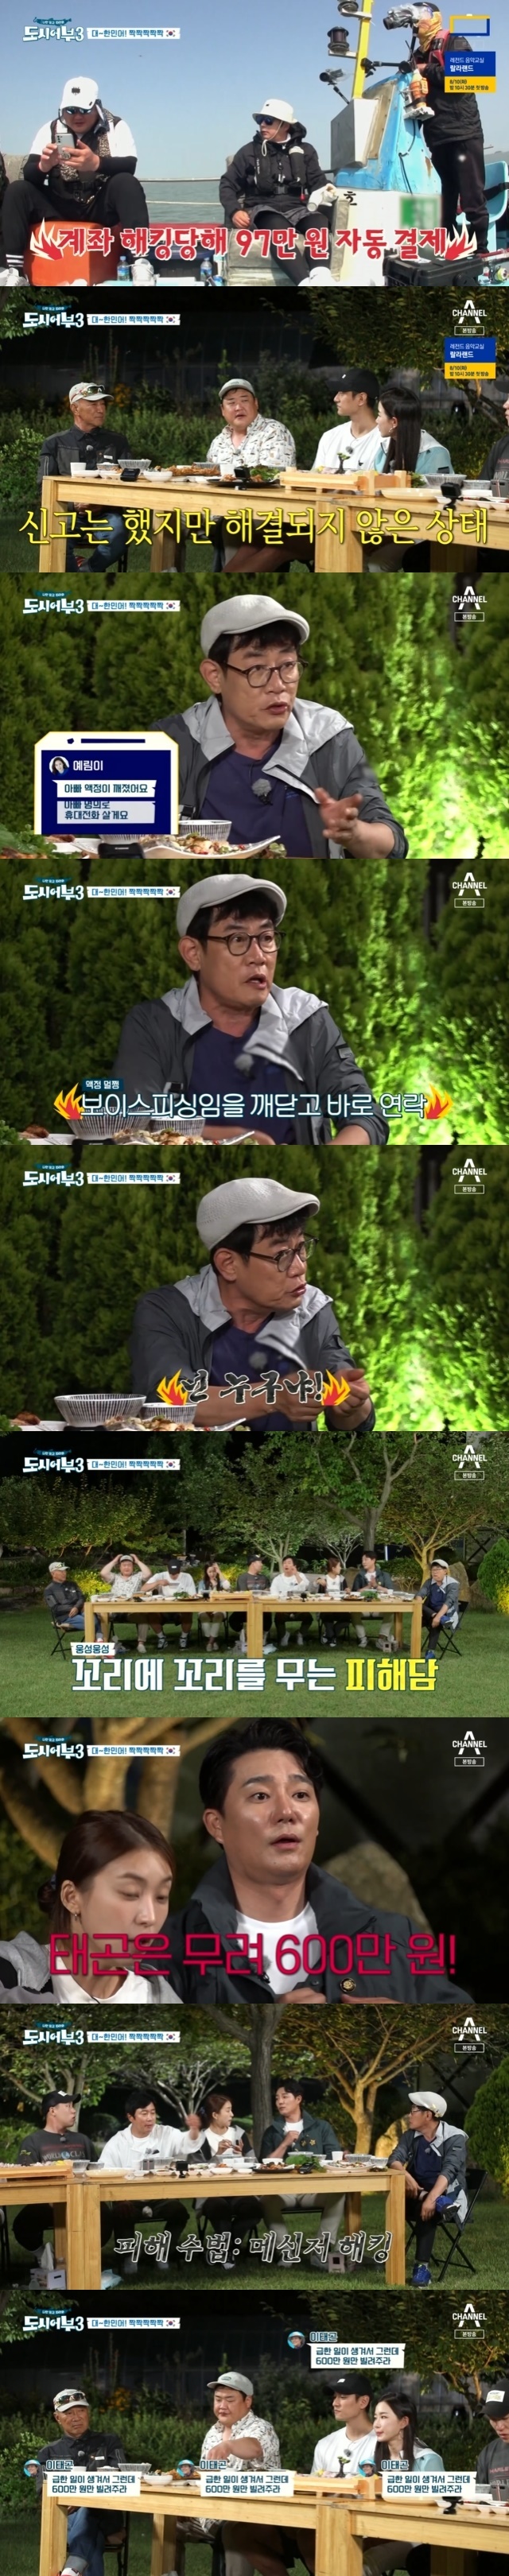 Lee Kyung-kyu, Kim Joon-hyun, Lee Tae-gon was shocked to hear the damage of the voice phishing of the weather outward technique.In the 14th episode of Channel A entertainment Follow Me Only, and City Fisherman Season 3 (hereinafter referred to as City Fisherman 3), which was broadcast on August 5, Kim Ha-Youngs follow-up to the Jeonbuk Buan Bulletin Chinese drum was held with guest Mo Tae-Bum, Kim Yo-han and Bora.On this day, Jang PD announced the golden badge standard before the departure.Among the Chinese drums over 68cm, the golden badge was going to return to the main character of Big One and the winner of the confrontation regardless of the fish species.The City fisherman, who could not catch the Chinese drum, was in a position to be confiscated.As a result of the draw, the best place 2 was Lee Deok-hwa, and both sides were Kim Ha-Young and Bora.Lee Kyung-kyu received a relatively poor eight-placed spot, but nevertheless surprised everyone by becoming the main character of the first Chinese drum.Lee Kyung-kyu, who calmly raised the fishing rod thinking it was a song beauty, checked the Chinese drum and said, Its Chinese drum! I kept my badge as soon as I did it!I came in the empty house. The size was 45cm, a performance of just five minutes after fishing. Lee Kyung-kyu has since taken a three-game lead and a Donggaldome.Next, Lee Soo-geun, who caught the 47cm Chinese drum, was relieved that Lee Soo-geun would now be fishing a little more comfortably.Lee Kyung-kyu envied Lee Soo-geun by catching the 38cm second Chinese drum.Lee Kyung-kyu then stretched out to his feet and enjoyed the leisure, saying, This is a life fishing.Kim Ha-Young, who stood at the center of civil complaints in the meat without news, caught the Chinese drum for the third time.The Chinese drum, which came up after a long fight, boasted almost monster size.Kim Ha-Young, who once again achieved the miracle of a fish suit following the last golden trout, liked to have two hair.The size of the Chinese drum was 67cm, slightly below the golden medium standard.They then went to the promised land for Chinese drum points, but this place was also a slam.Instead, Mo Tae-Bum became a warrior in the reverse, catching a 62cm giant sea bass five minutes before the end.This was the third largest bass language in the history of the City Department, which was the result of overturning the record of Kim Ha-Young and Lee Kyung-kyus total weight.Mo Tae-Bum became the only golden badge protagonist of the day.Kim Joon-hyun, Lee Tae-gon and Lee Deok-hwa, who failed to catch the Chinese drum, returned the badge.On the other hand, a live broadcast listener to Kim Joon-hyun attracted attention by asking about the last Voice phishing incident.Kim Joon-hyun earlier suffered automatic payment damage from hacking accounts during fishing.Kim Joon-hyun said that the total damage amount was 970,000 won and that it is still being handled.Lee Soo-geun also delivered a funny anecdote as a person who vividly remembers the time.Kim Joon-hyun and Lee Kyung-kyu, a team, are talking to Kim Joon-hyun to solve the problem and say, Fishing! (Lee Kyung-kyu) nagged, How are you going to find it, Ive already been hit, laughed Lee Soo-geun, who added, It became edited on the air, and Kim Joon-hyun added, (Lee Kyung-kyu) said, Im making more money. ()Lee Kyung-kyu laughed and revealed that he was also suffering from voice phishing on the same day.Lee Kyung-kyu said: SMS Voice phishing came to me that day too (to my daughter Yerim) Father liquid crystal broke.Im gonna buy a cell phone in Fathers name. I called Yerim, but he didnt. He sent me SMS.